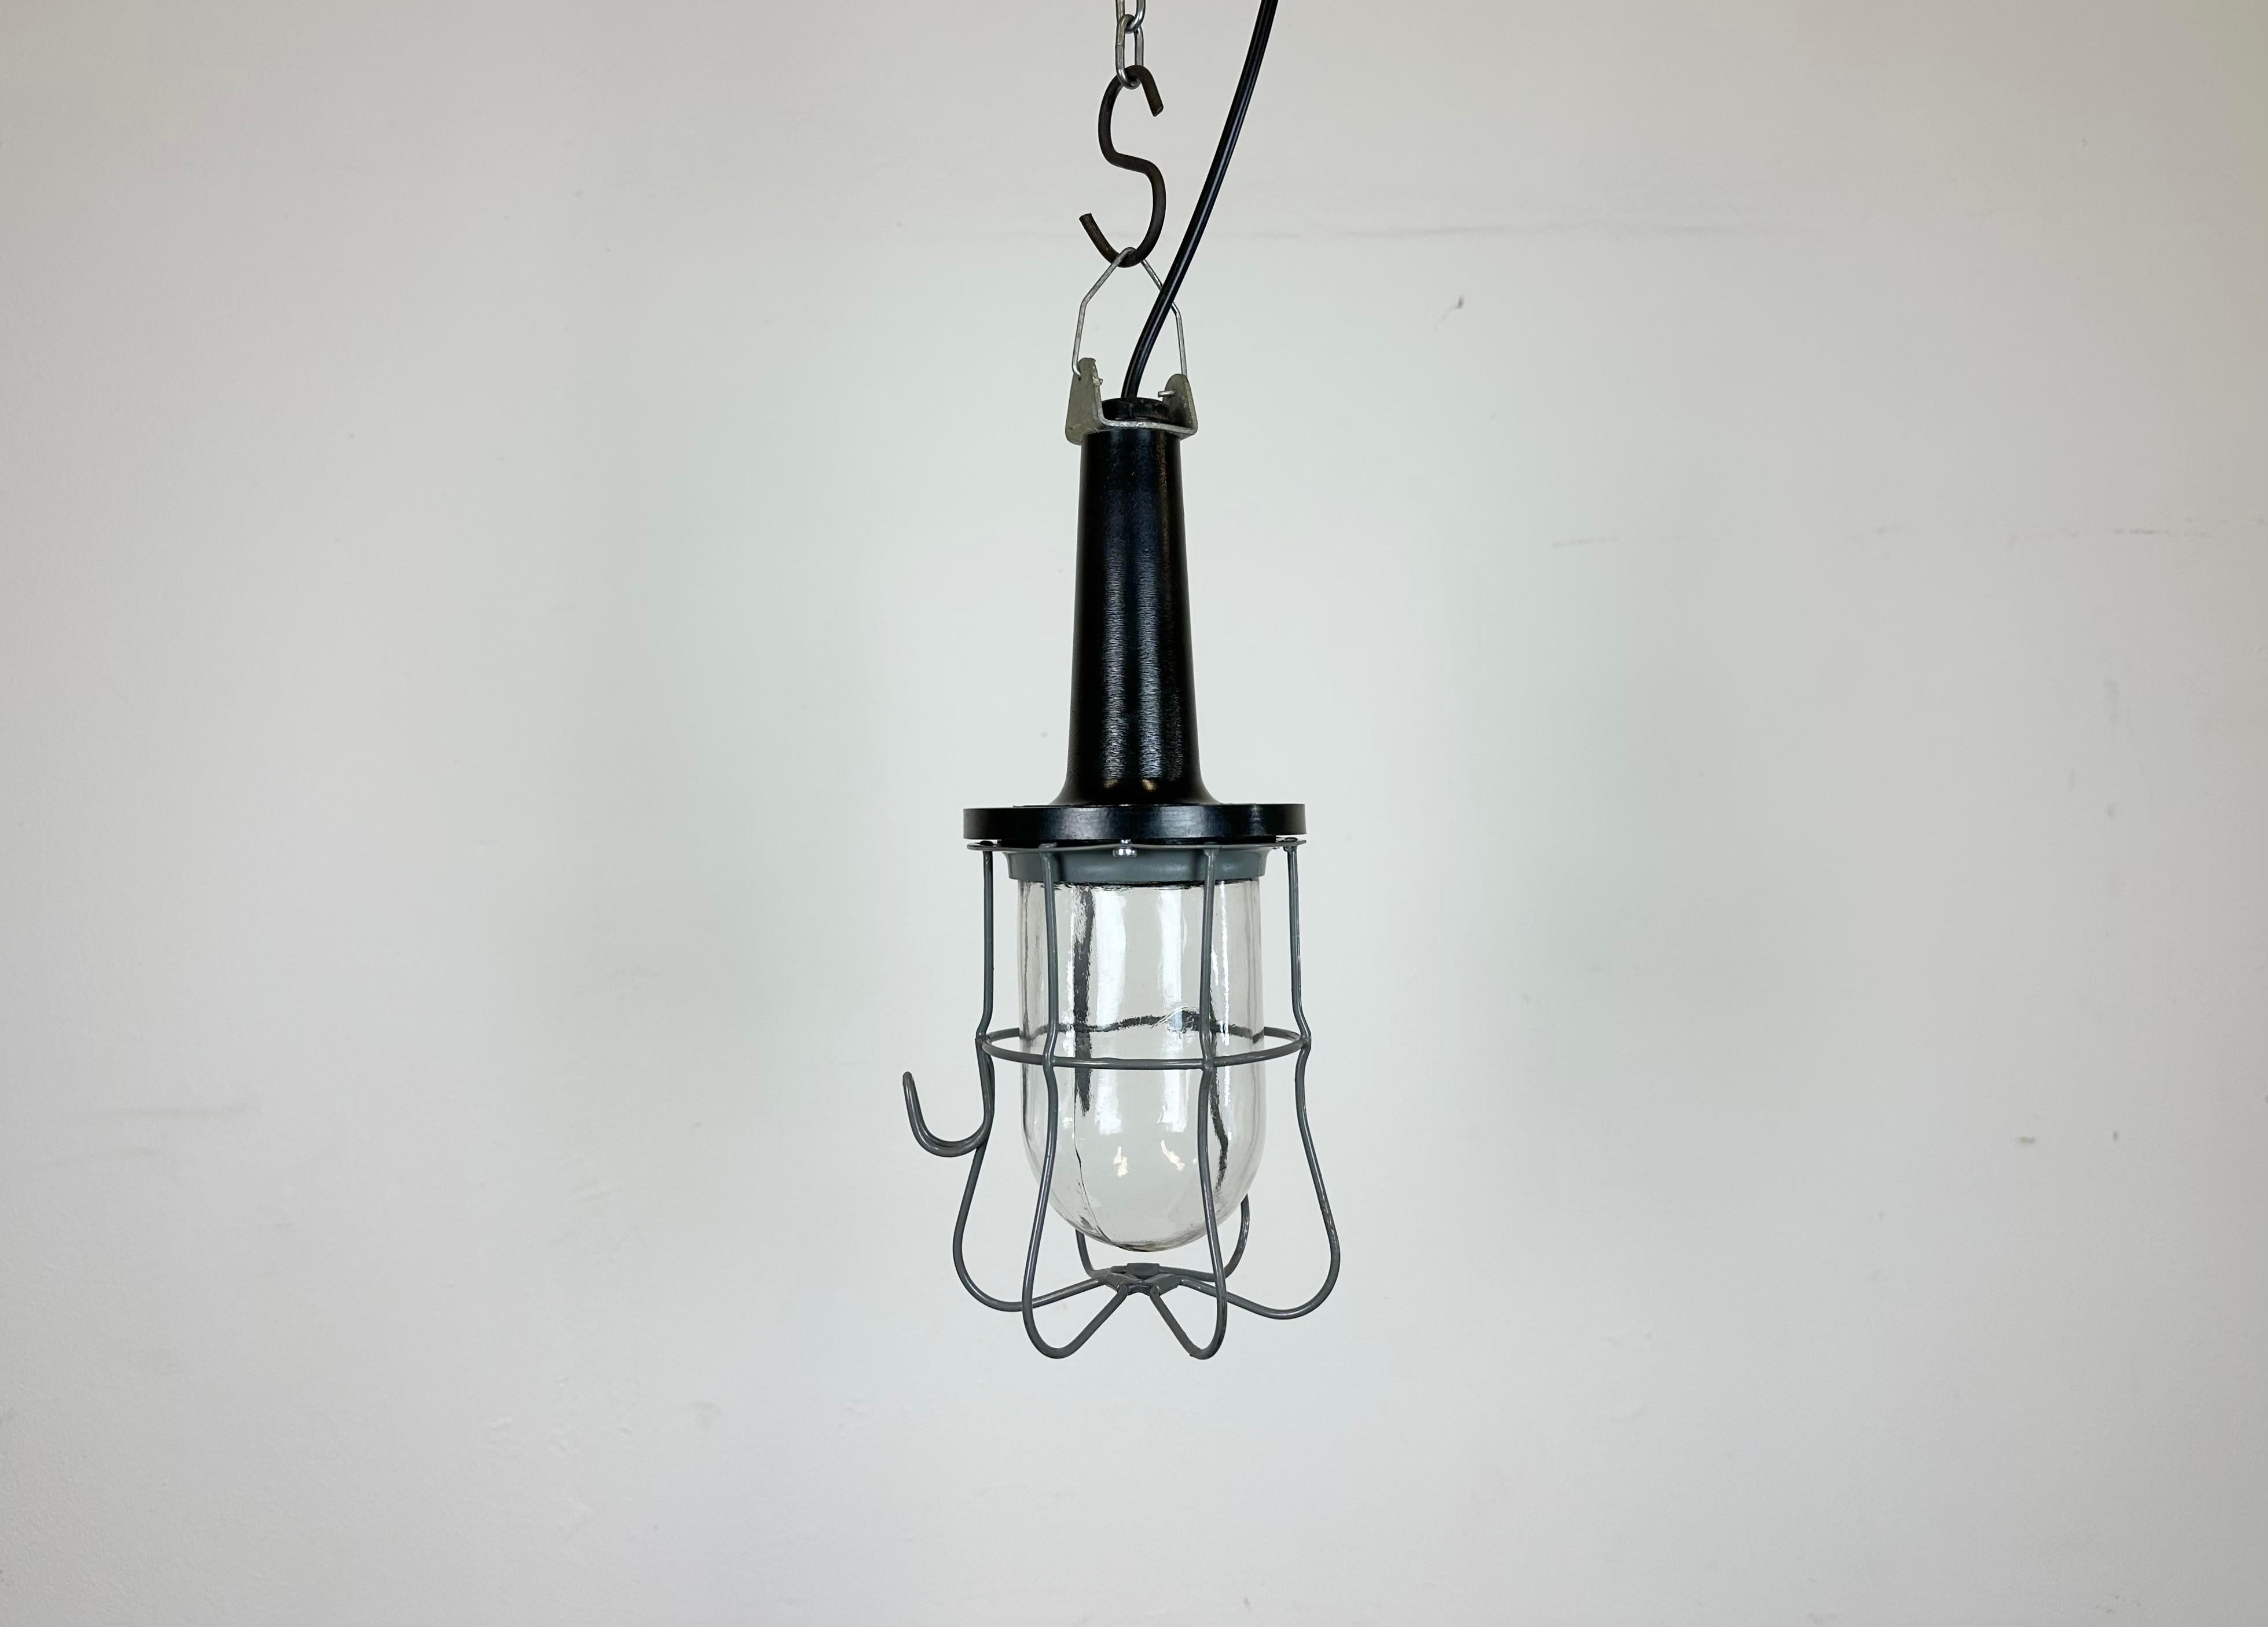 Industrial walkabout work lamp made in Poland during the 1960s These lamps were used in factories, workshops and army as a portable light source . It features a bakelite handle, a grey iron grid and clear glass cover.
The socket requires E27 light